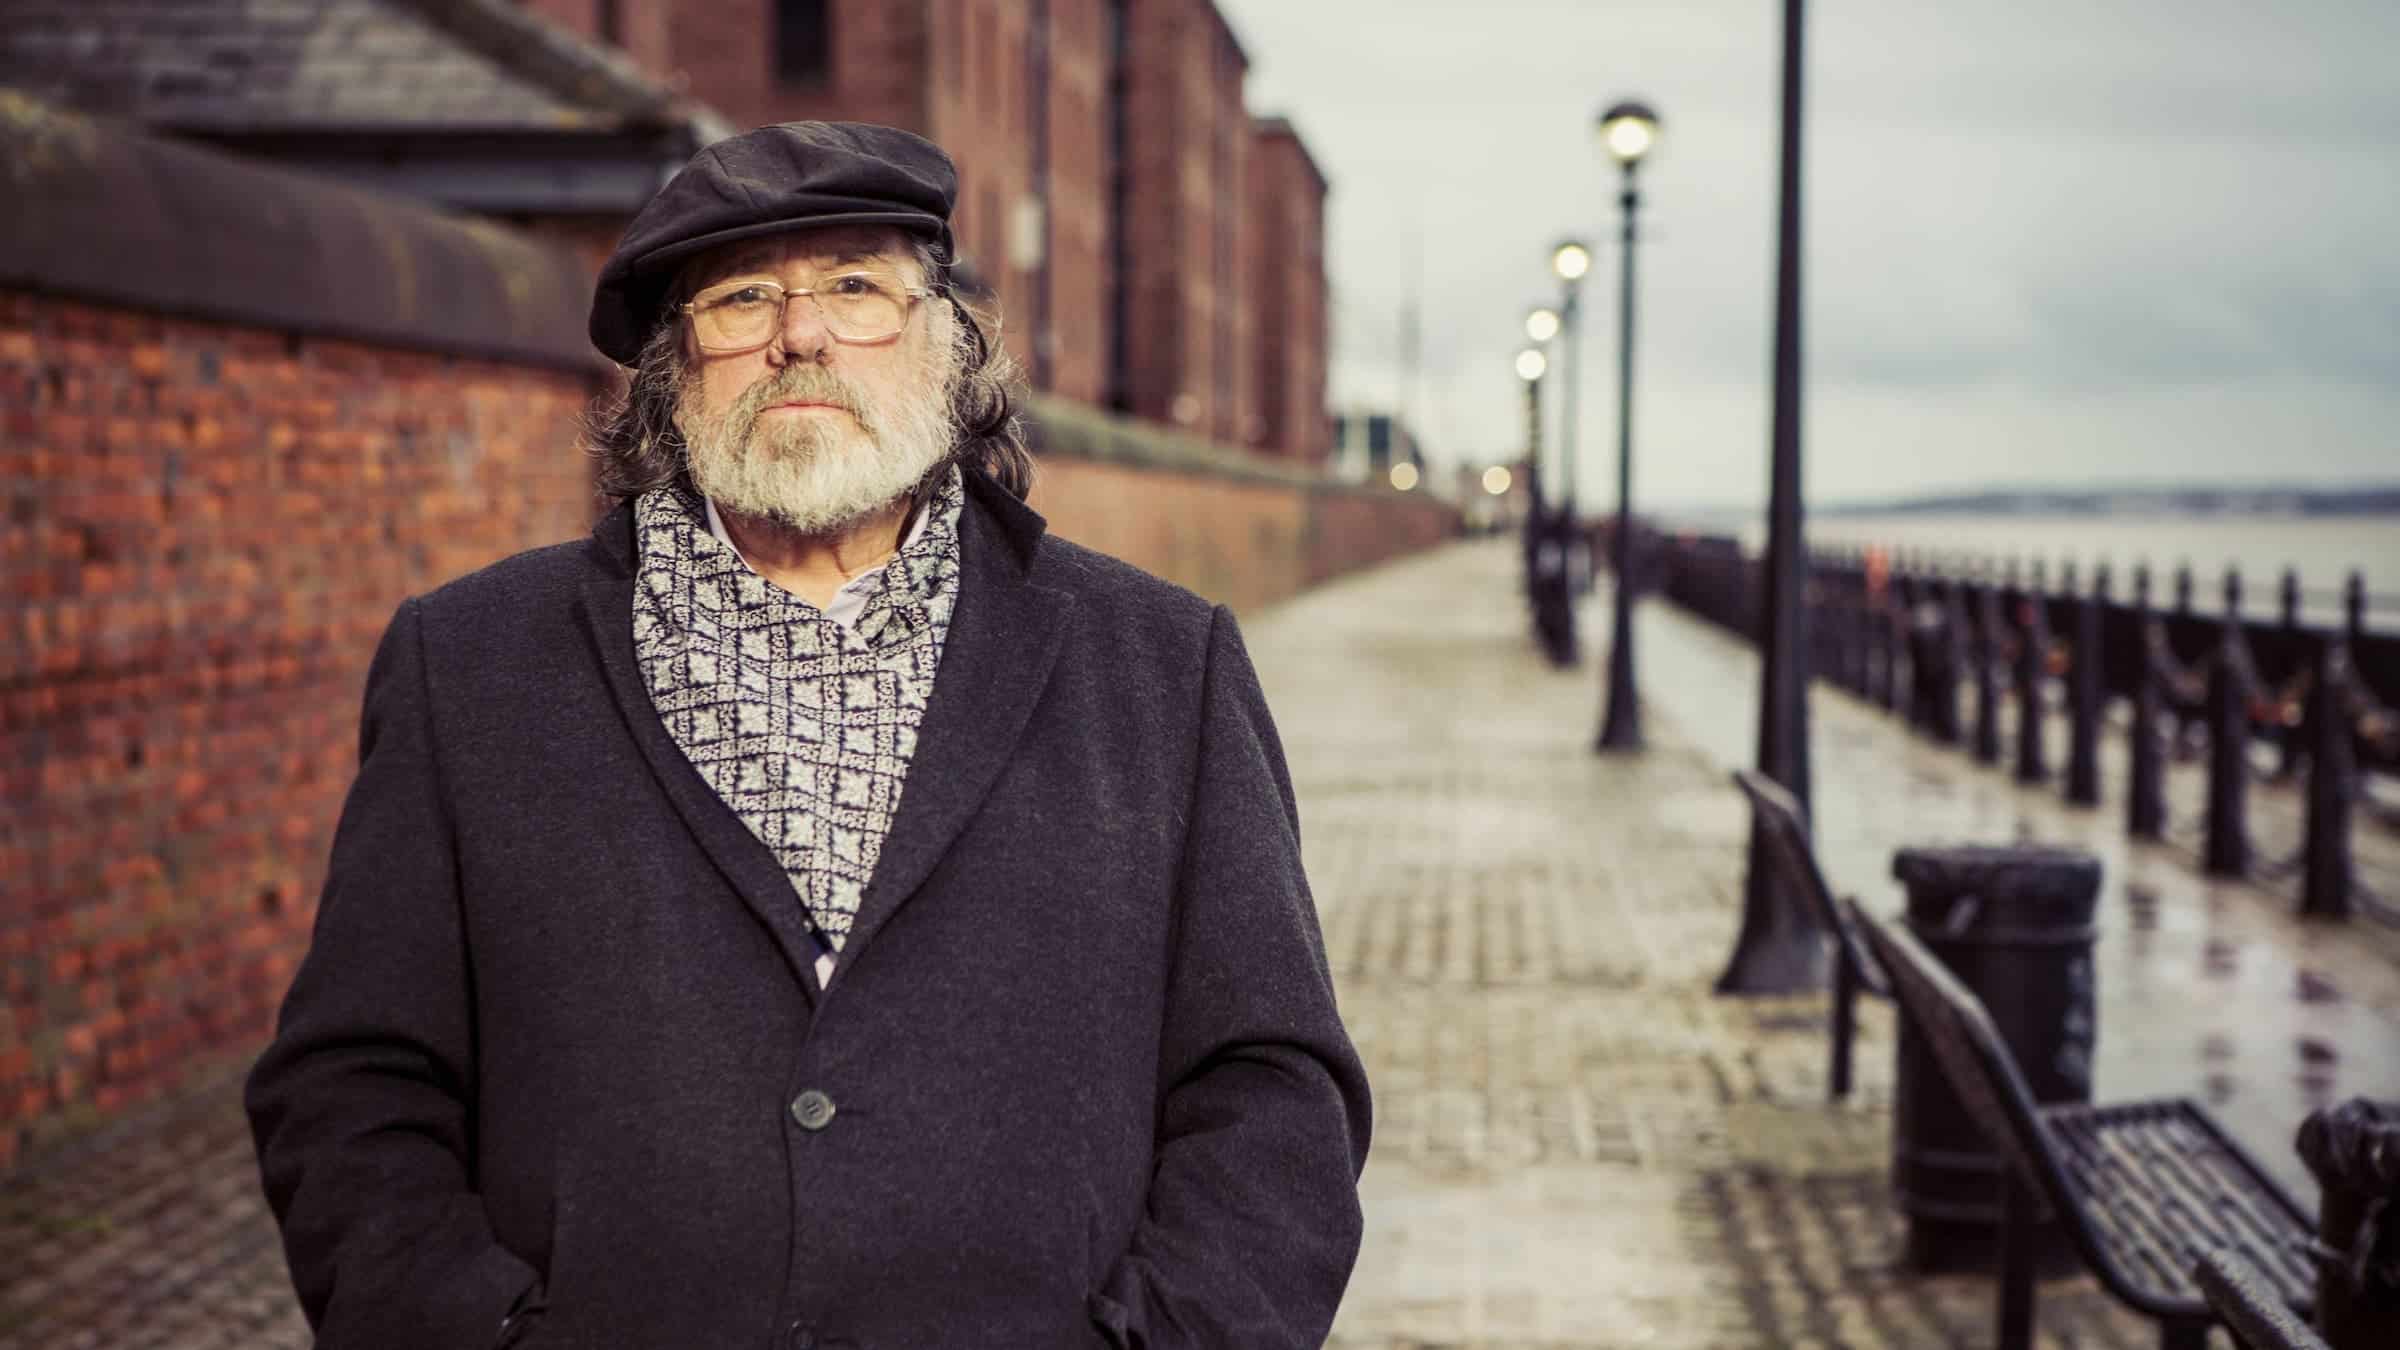 Video – Ricky Tomlinson reveals brother has died from Covid-19 and has important testing message